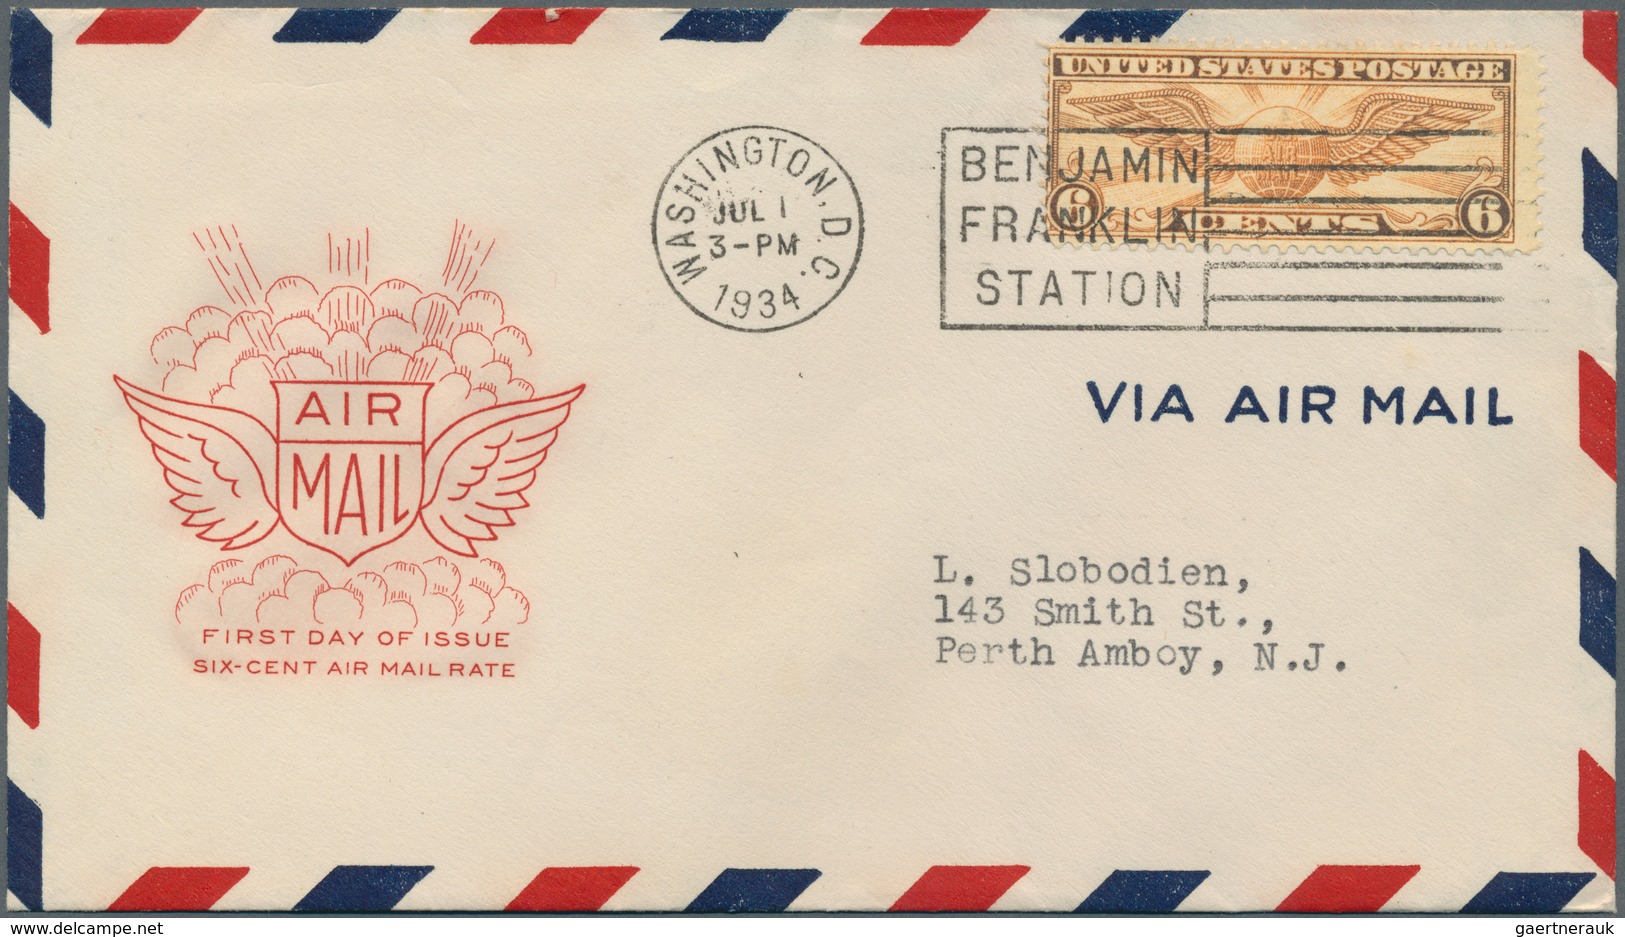 24397 Vereinigte Staaten von Amerika: 1927/1981 (ca): approx 310 better FDC, mostly from the twenties and